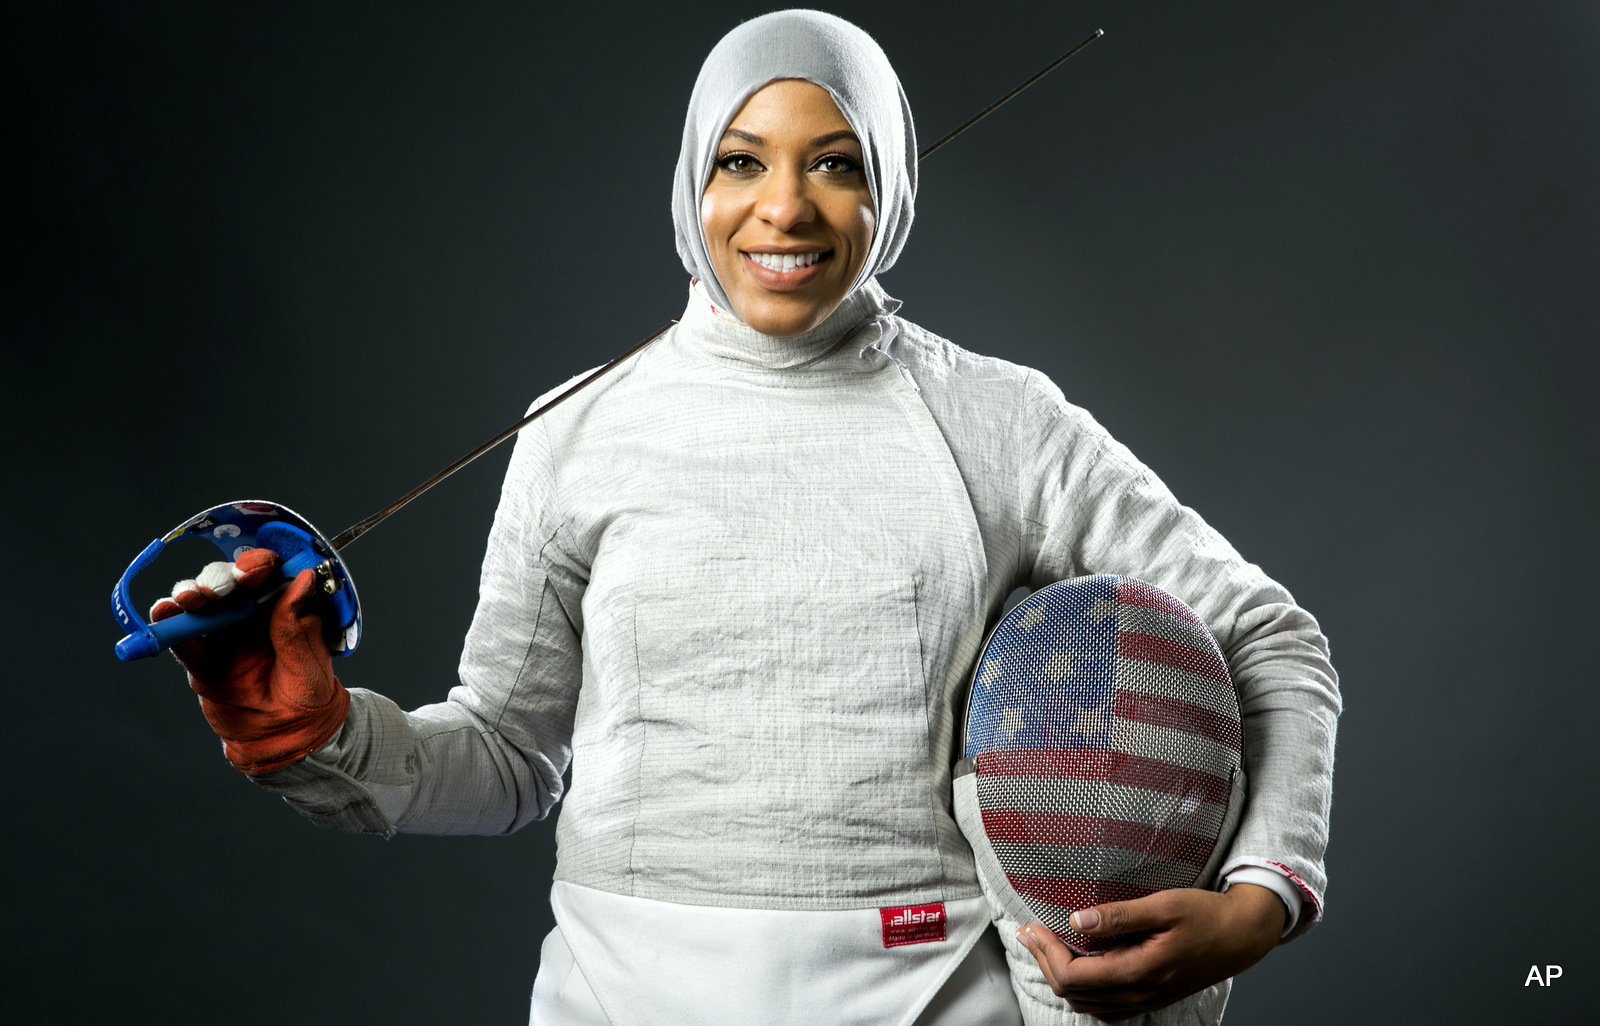 Fencer Ibtihaj Muhammad poses for photos at the 2016 Team USA Media Summit Wednesday, March 9, 2016, in Beverly Hills, Calif.